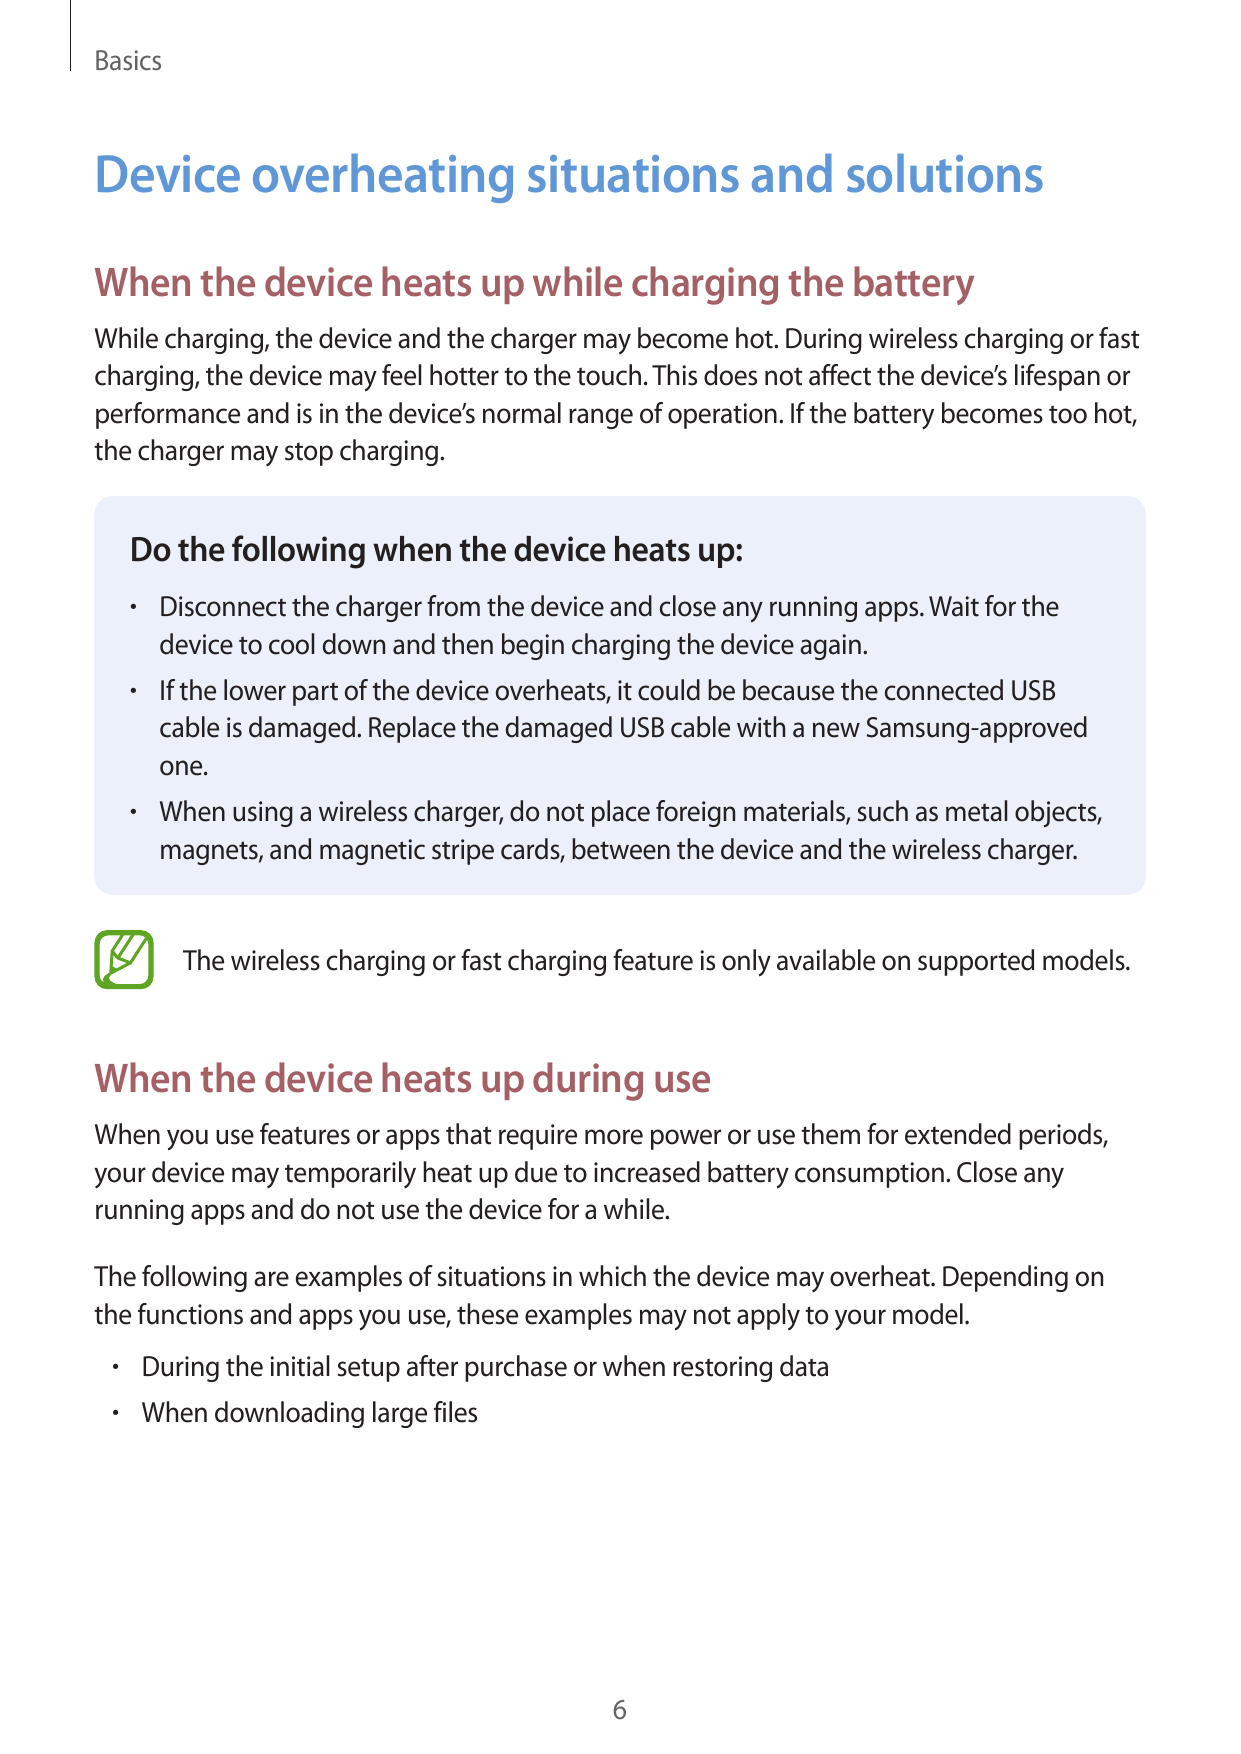 BasicsDevice overheating situations and solutionsWhen the device heats up while charging the batteryWhile charging, the device a